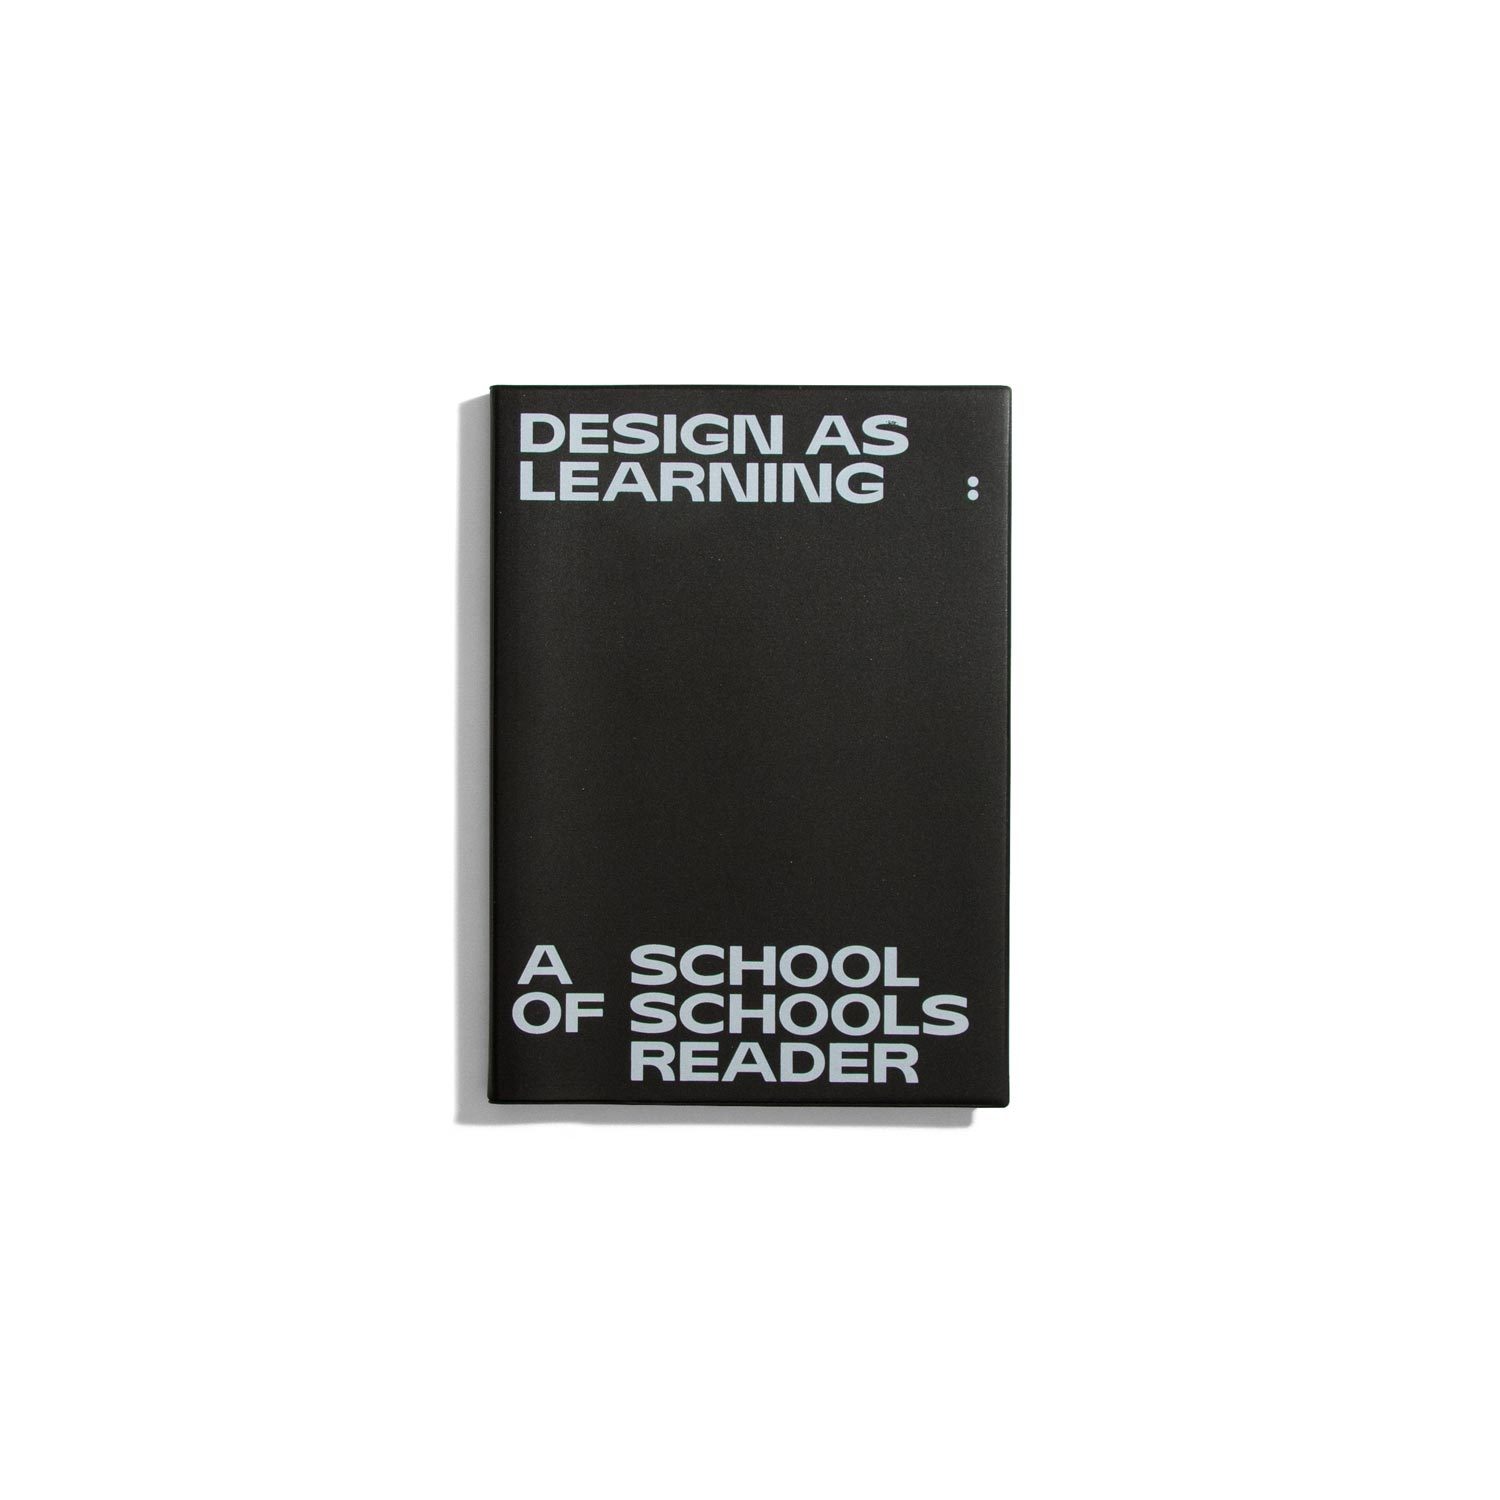 Design as Learning - A School of Schools Reader